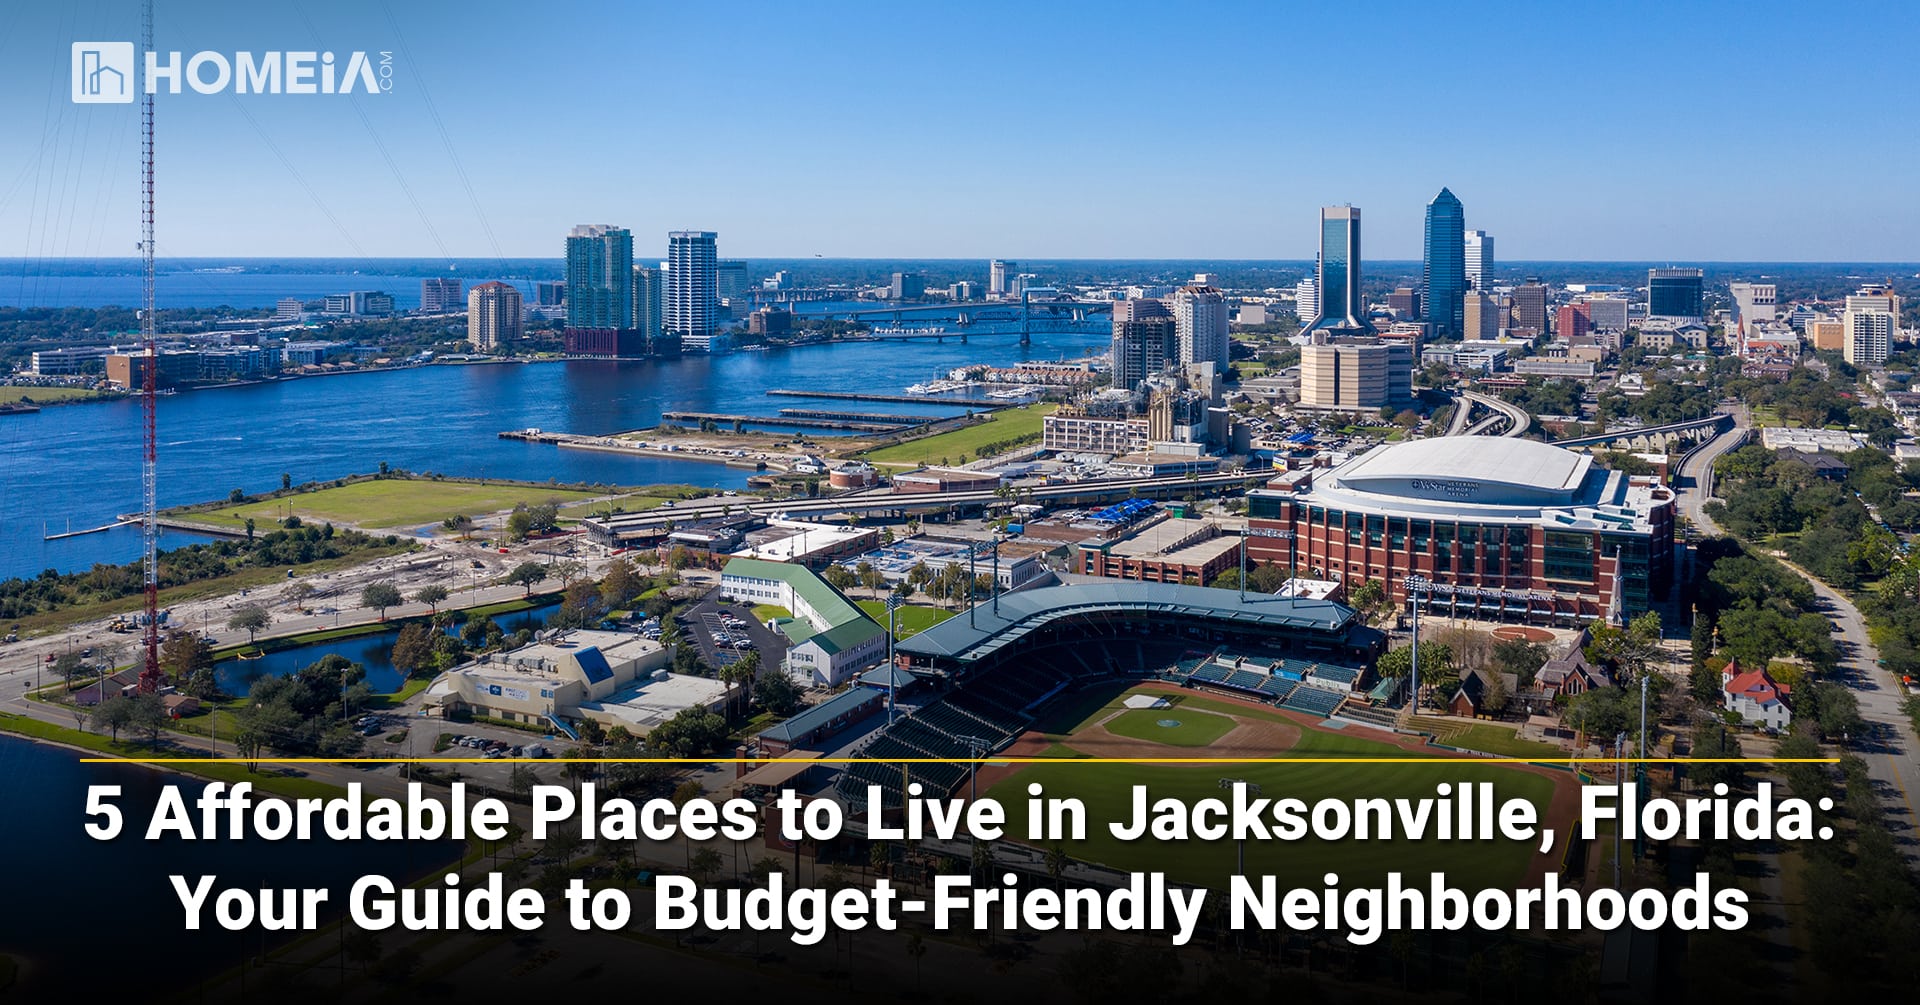 Affordable Living in Jacksonville, Florida: Your Guide to Budget-Friendly Neighborhoods